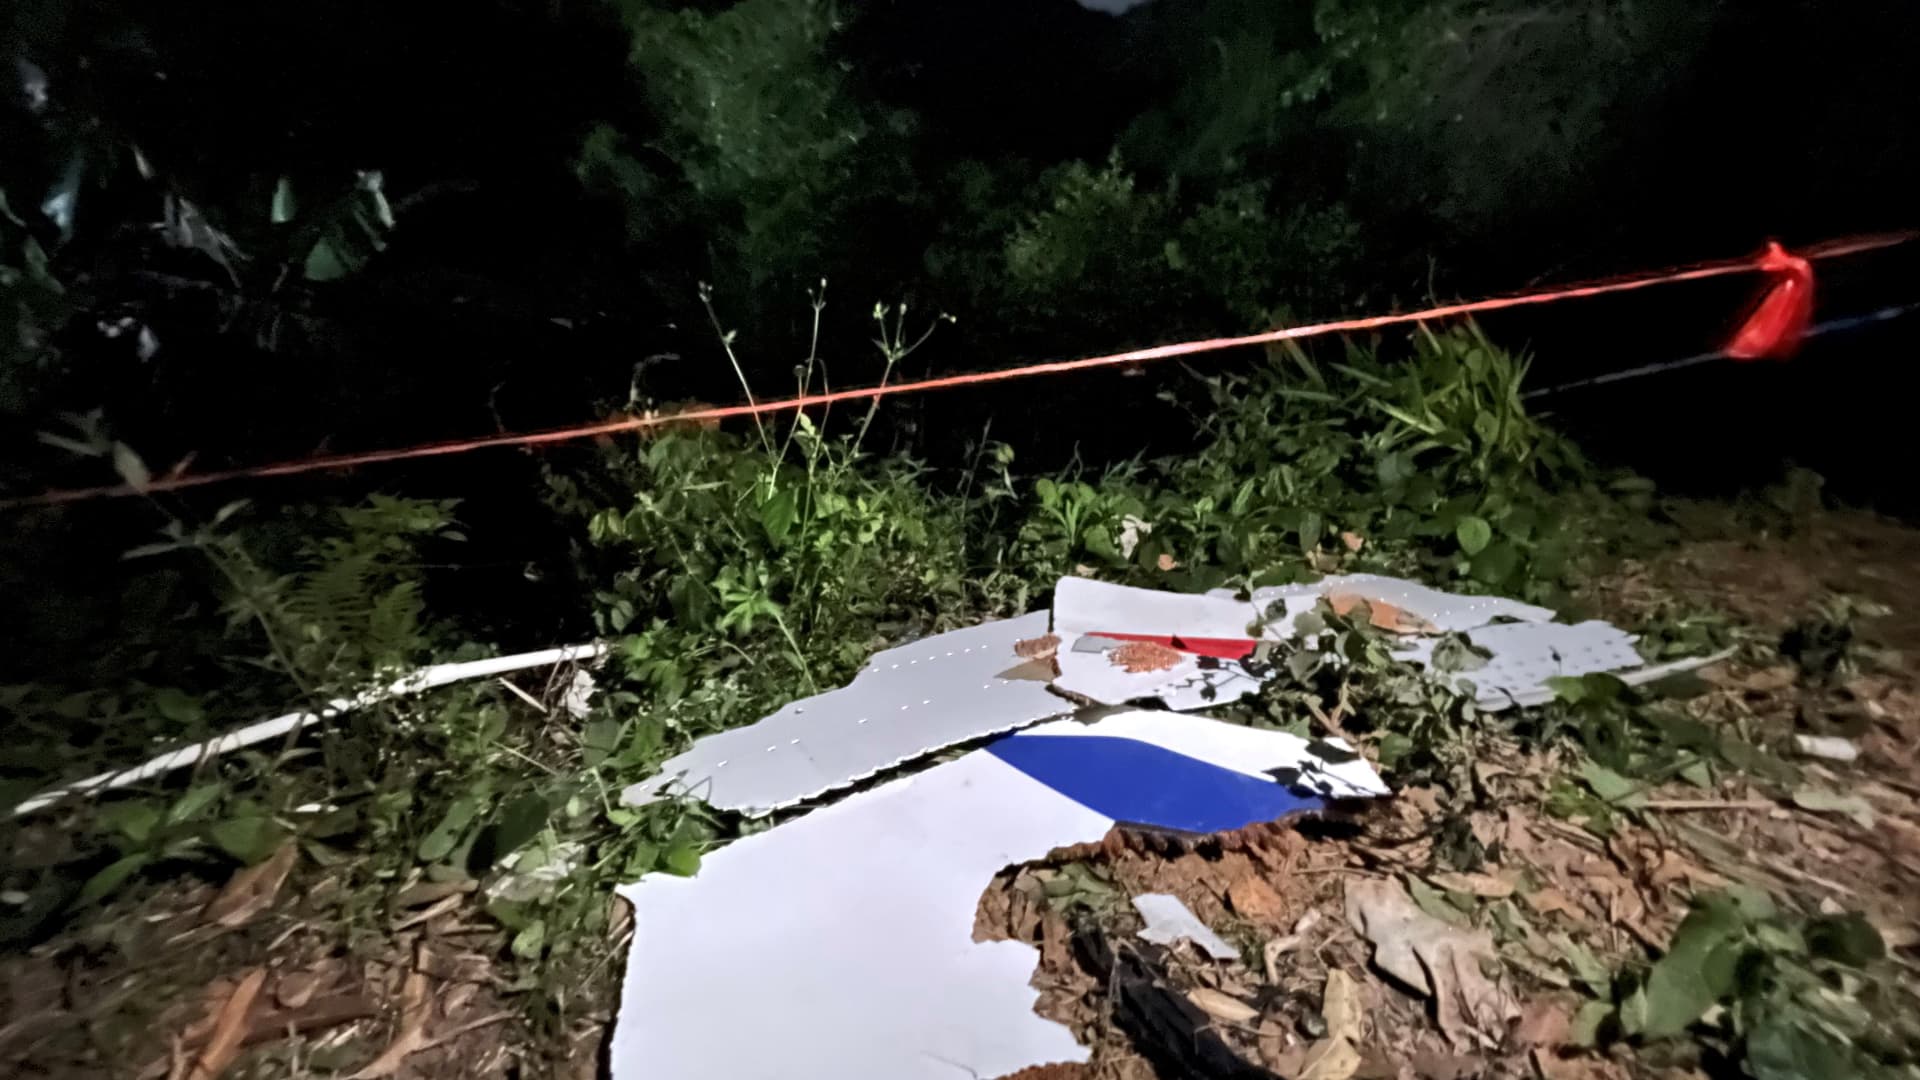 Photo taken with a mobile phone shows pieces of a crashed passenger plane's wreckage found at the crash site in Tengxian County, south China's Guangxi Zhuang Autonomous Region, March 22, 2022.